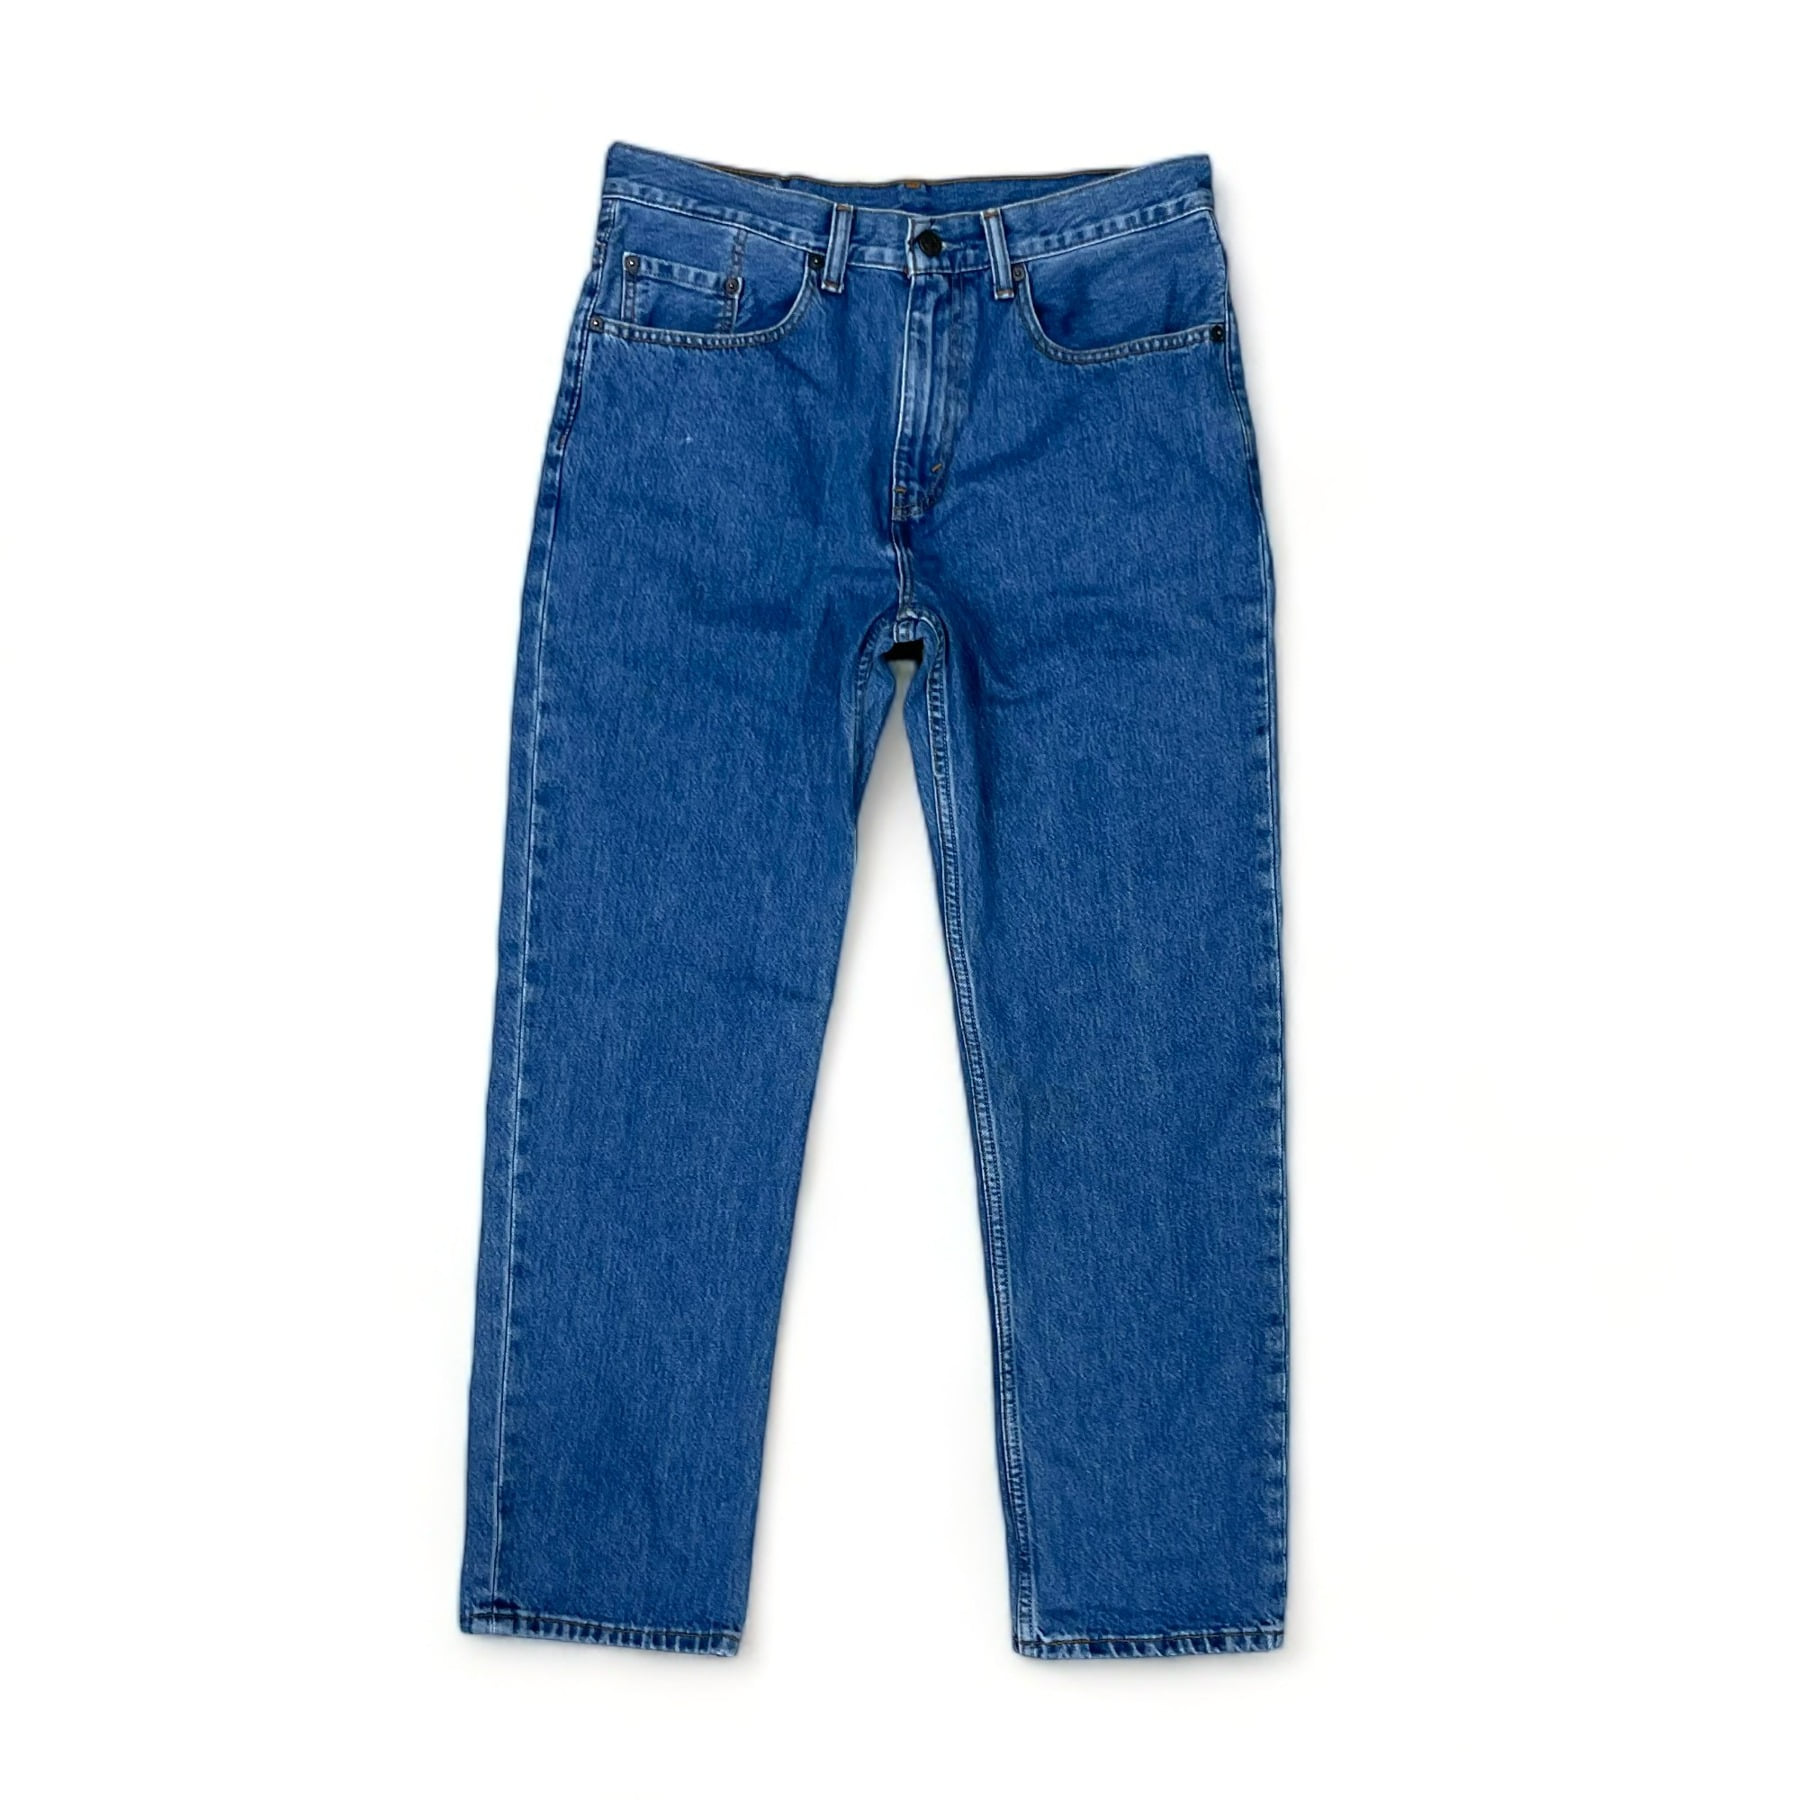 Levis 504 - 33inch